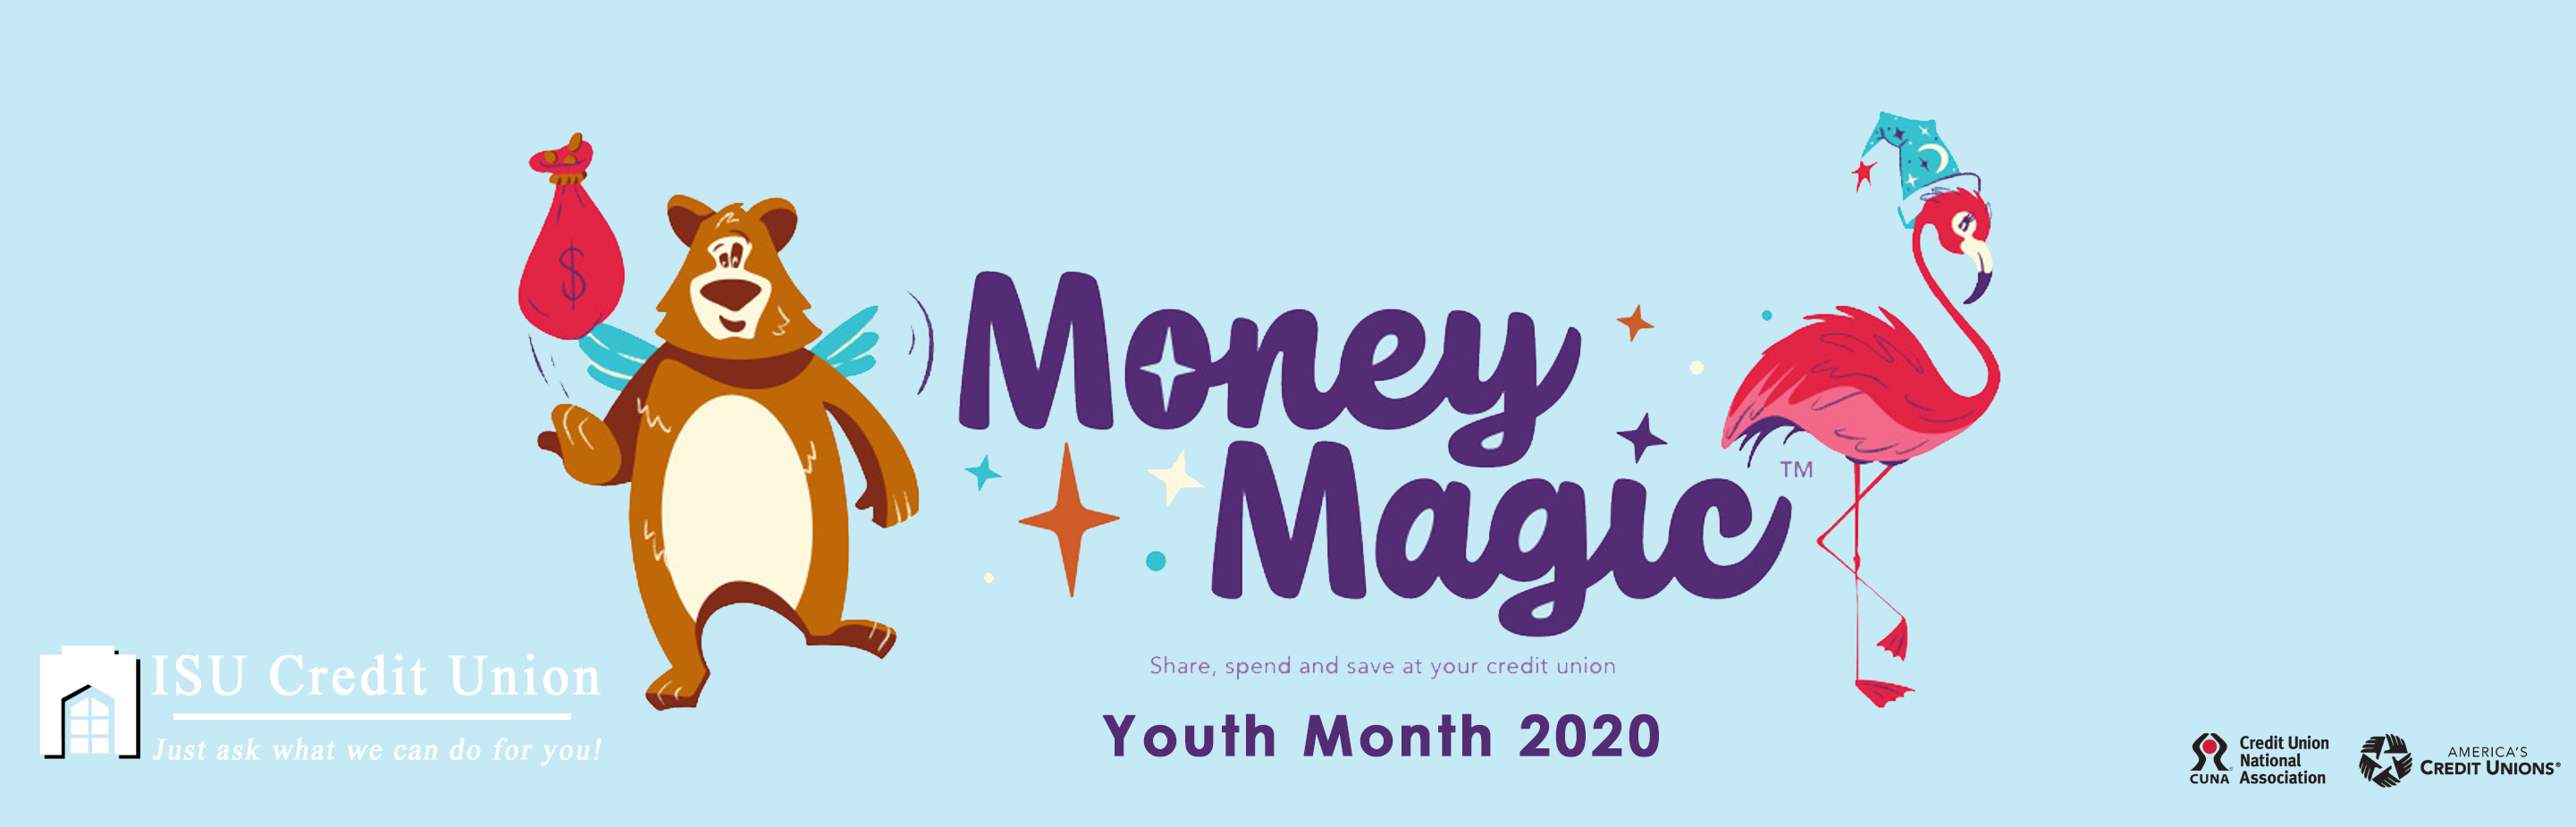 Money Magic. Share, spend and save at your credit union. Youth Month 2020